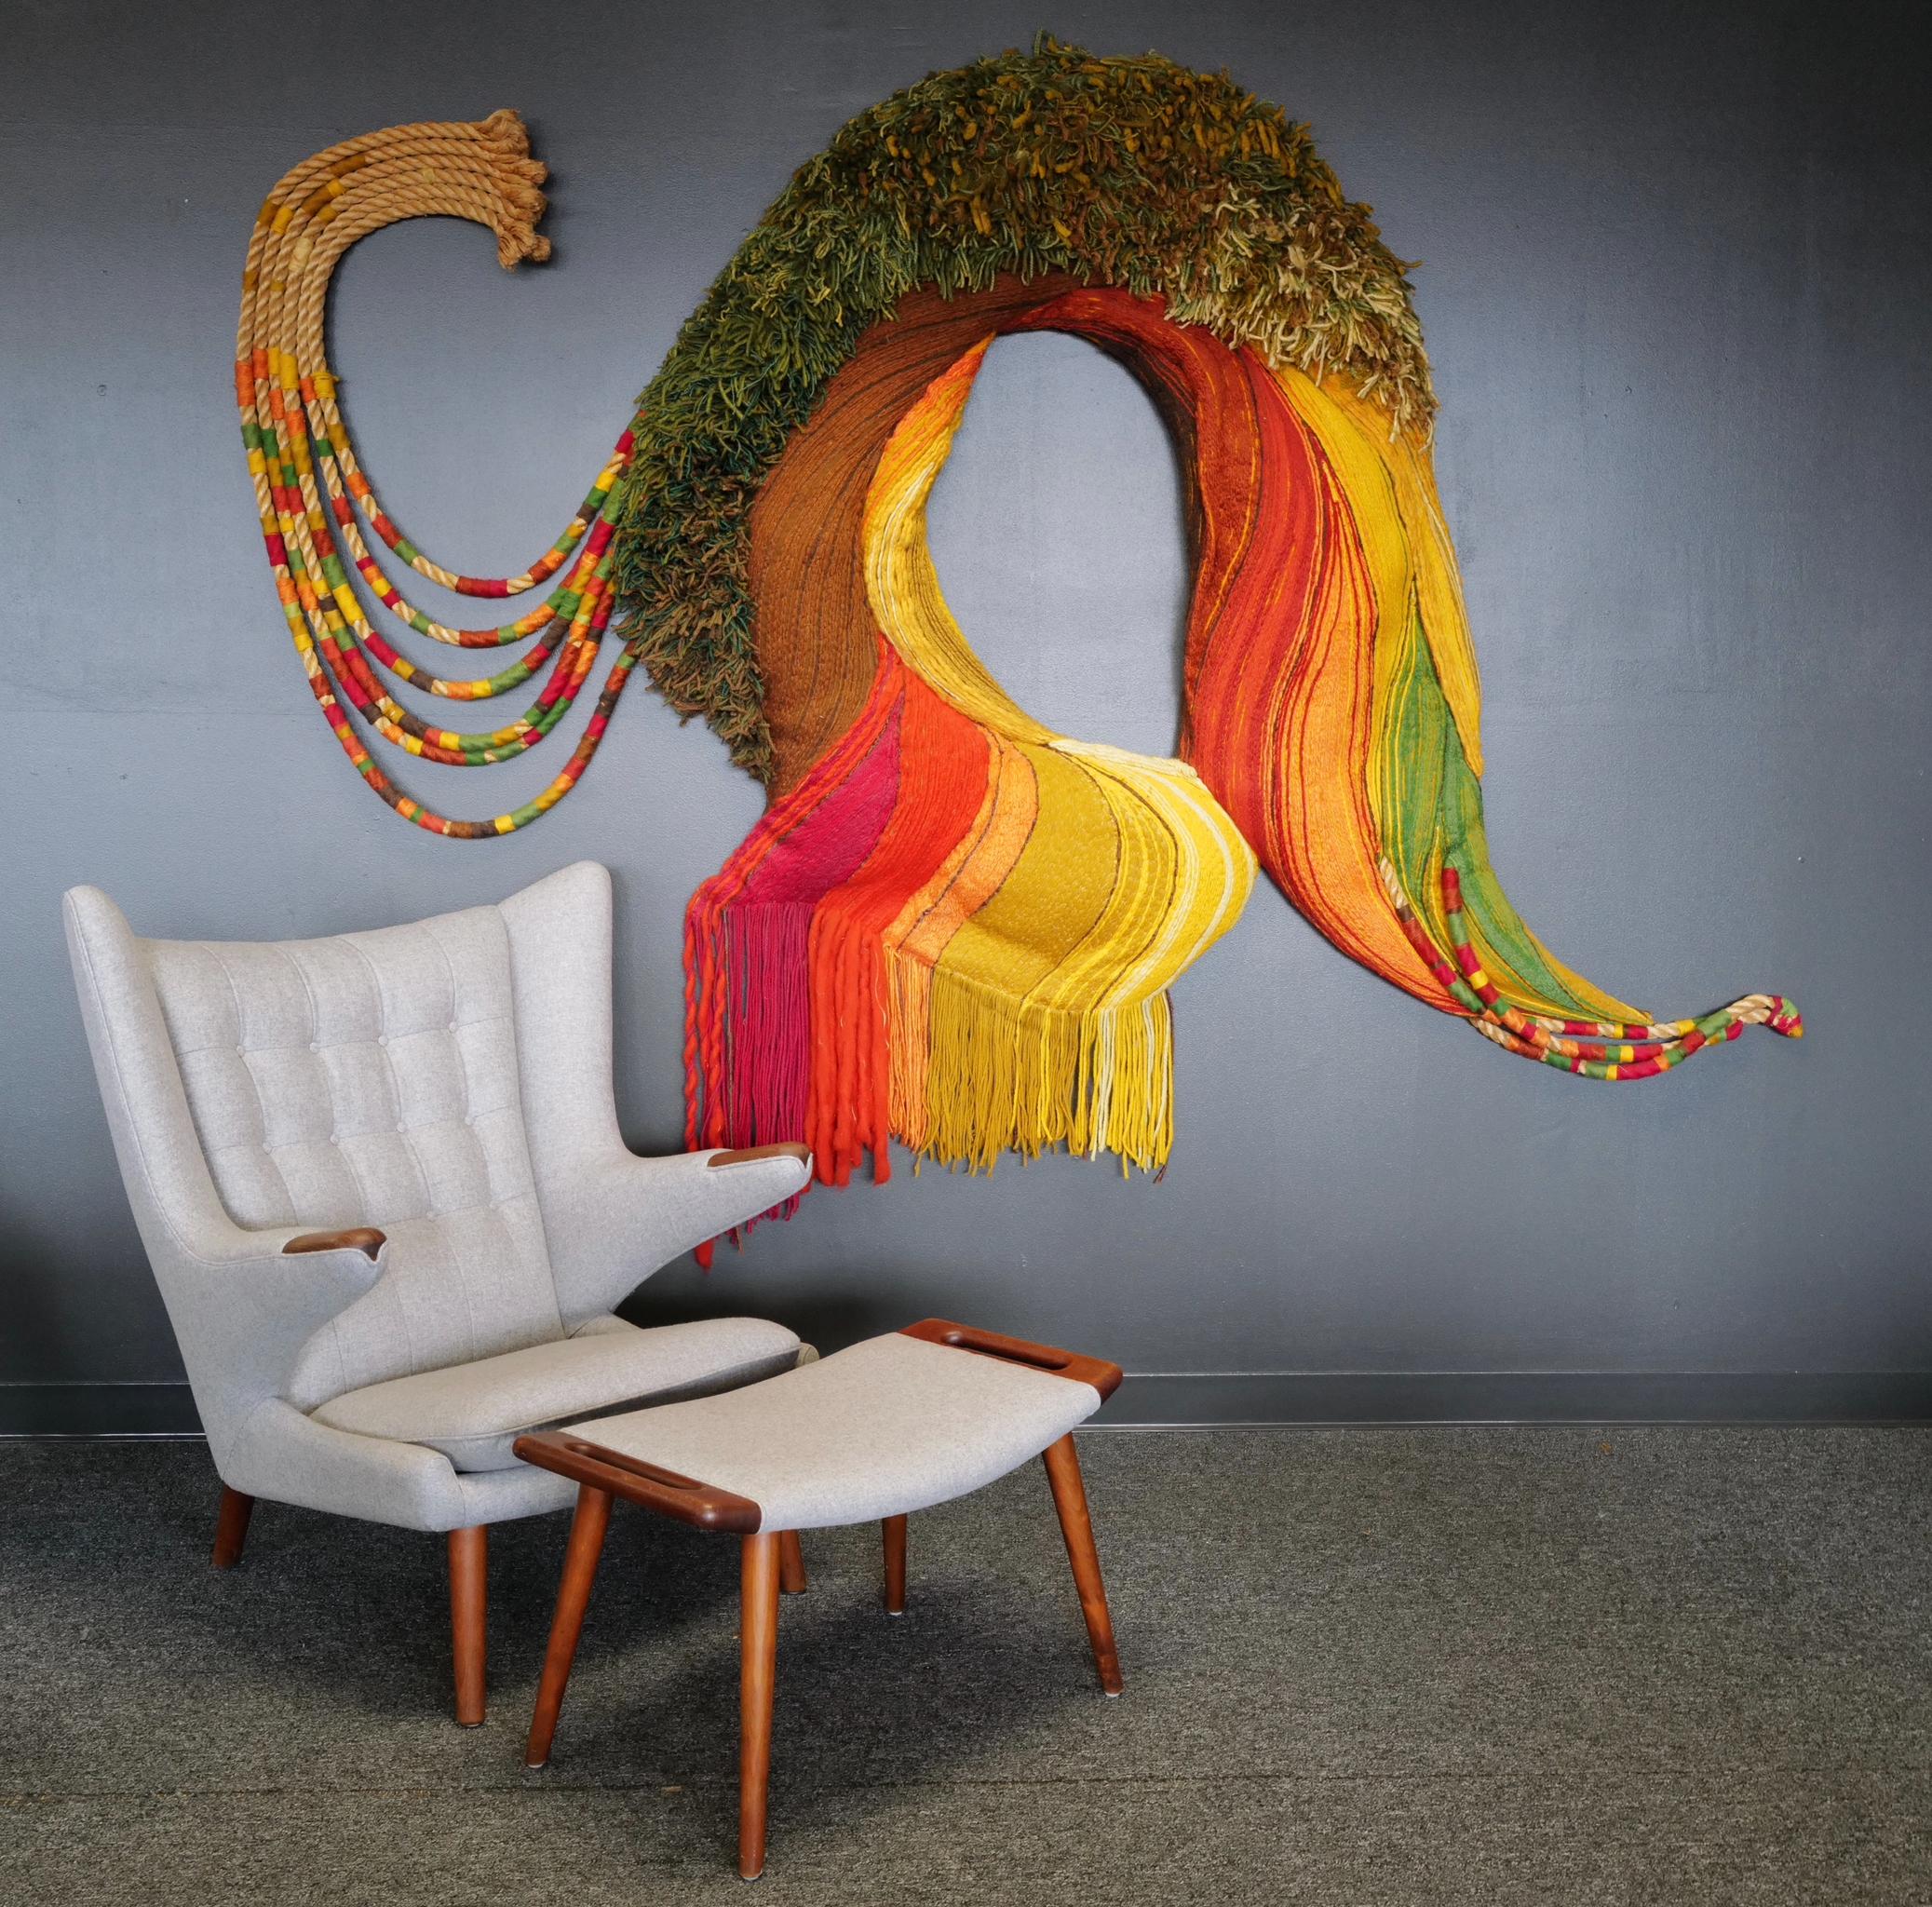 This expansive fiber art weaving by Janet Kuemmerlein boasts a vibrant palette of yellow, orange, reds, and greens, intricately intertwined to form a large organic shape. The rich hues blend seamlessly, creating a dynamic visual experience.